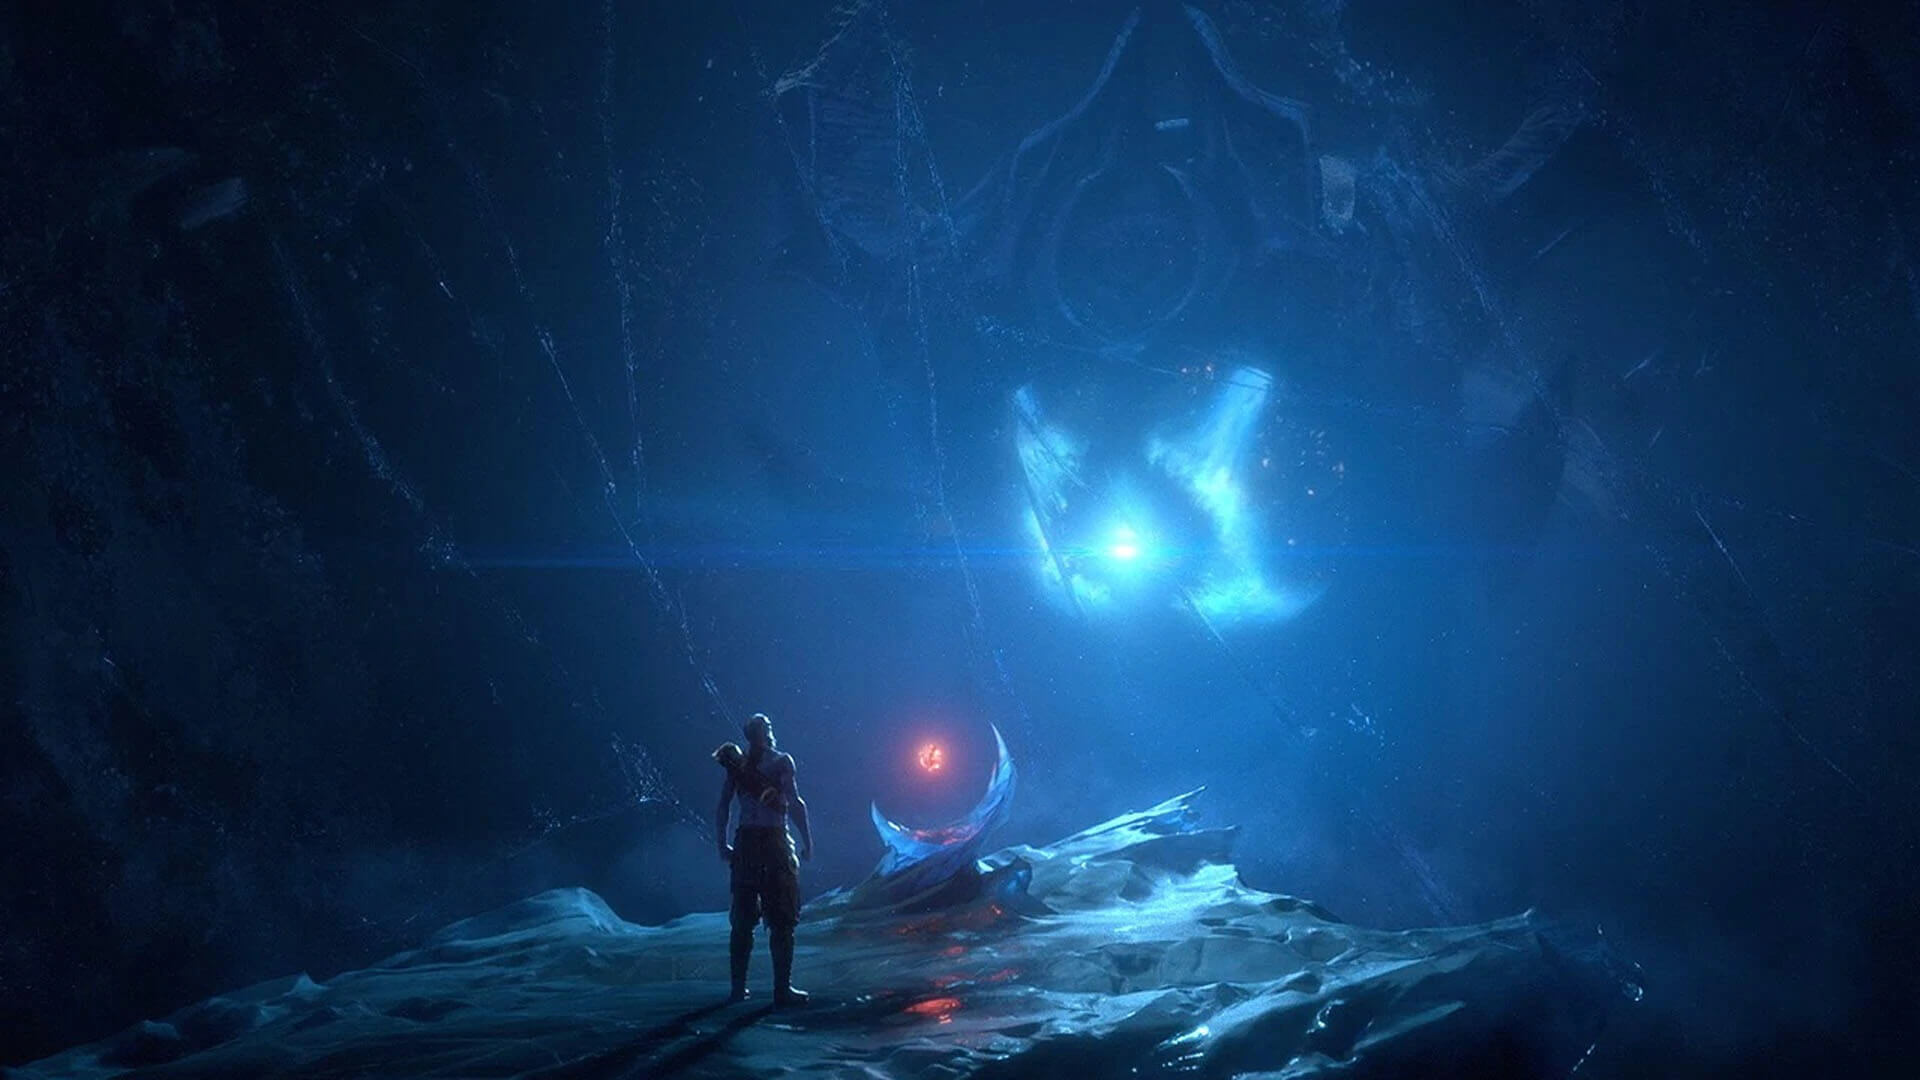 Ryze appears in front of a World Rune and is looking at a Frozen Watcher through the clear glass